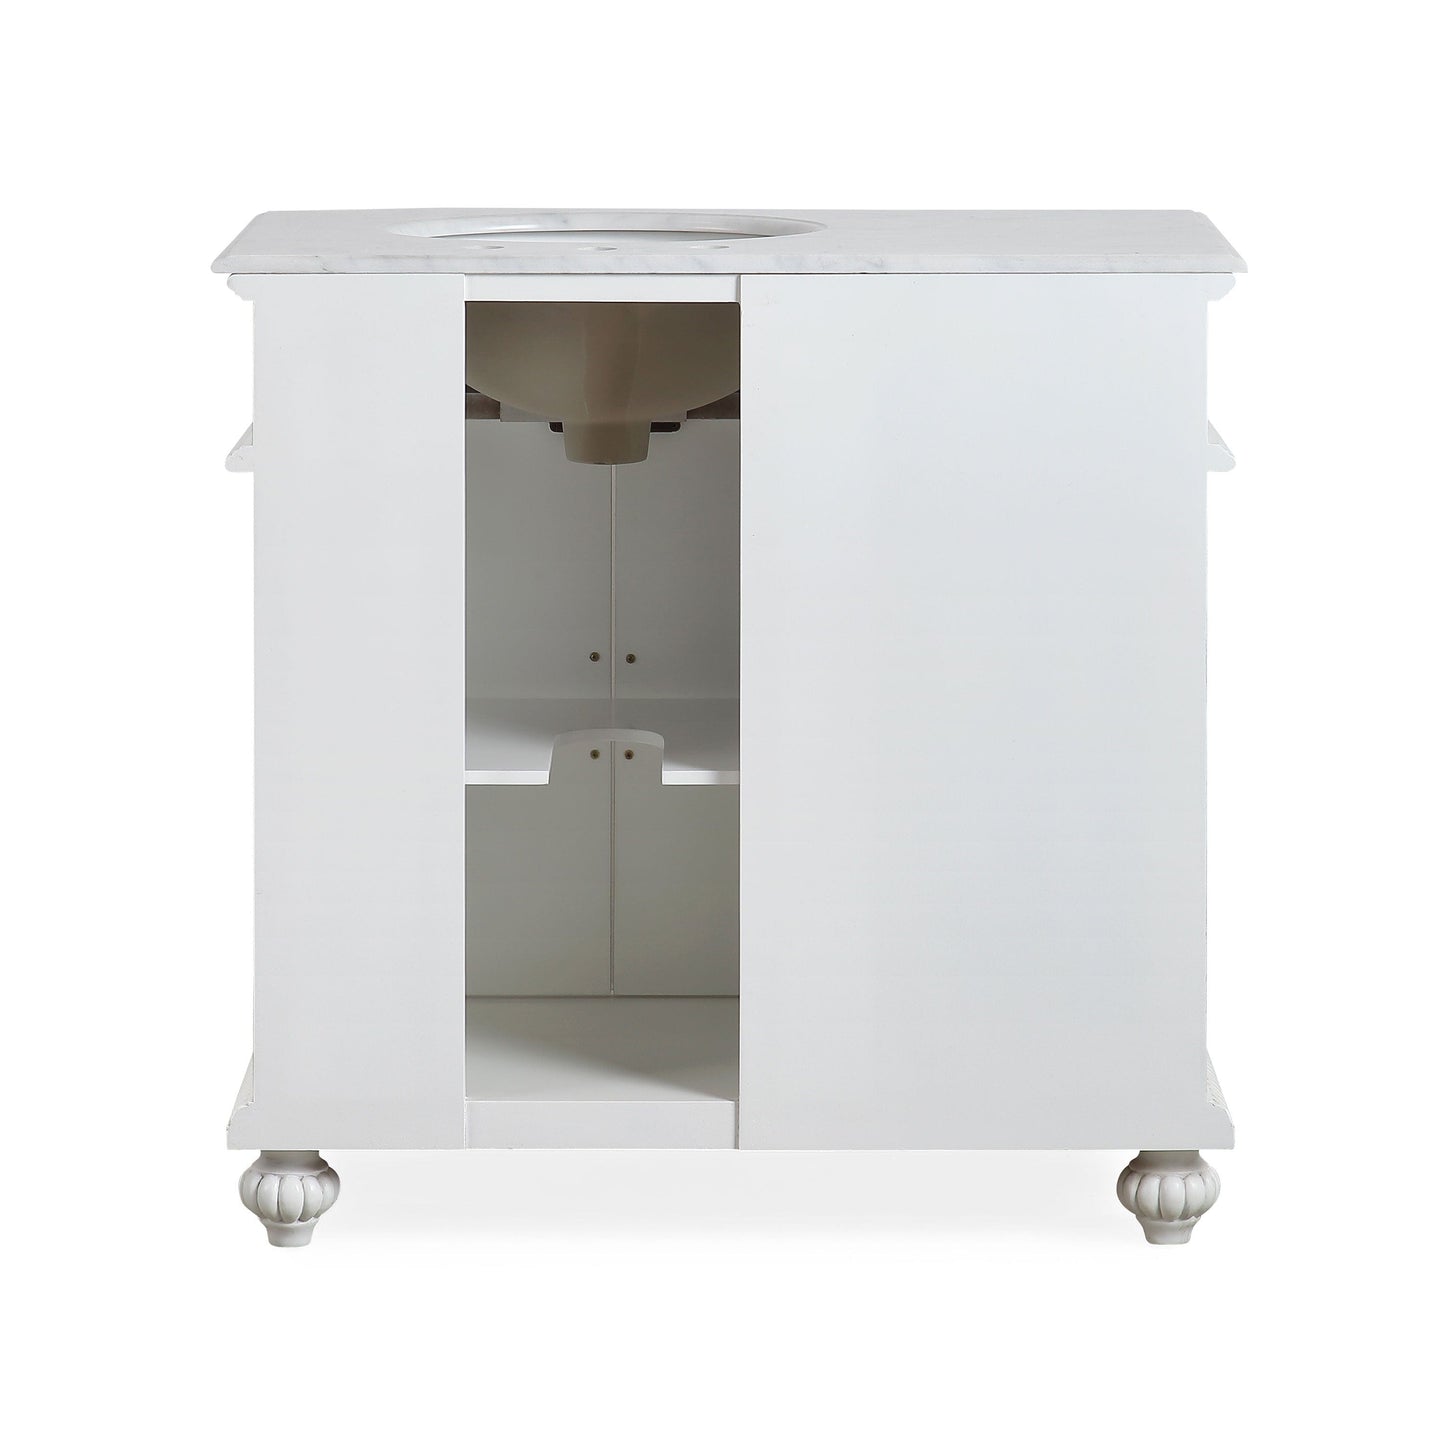 Silkroad Exclusive Silkroad Exclusive 36” Single Right Sink White Bathroom Vanity with White Marble Top V0213WW36R